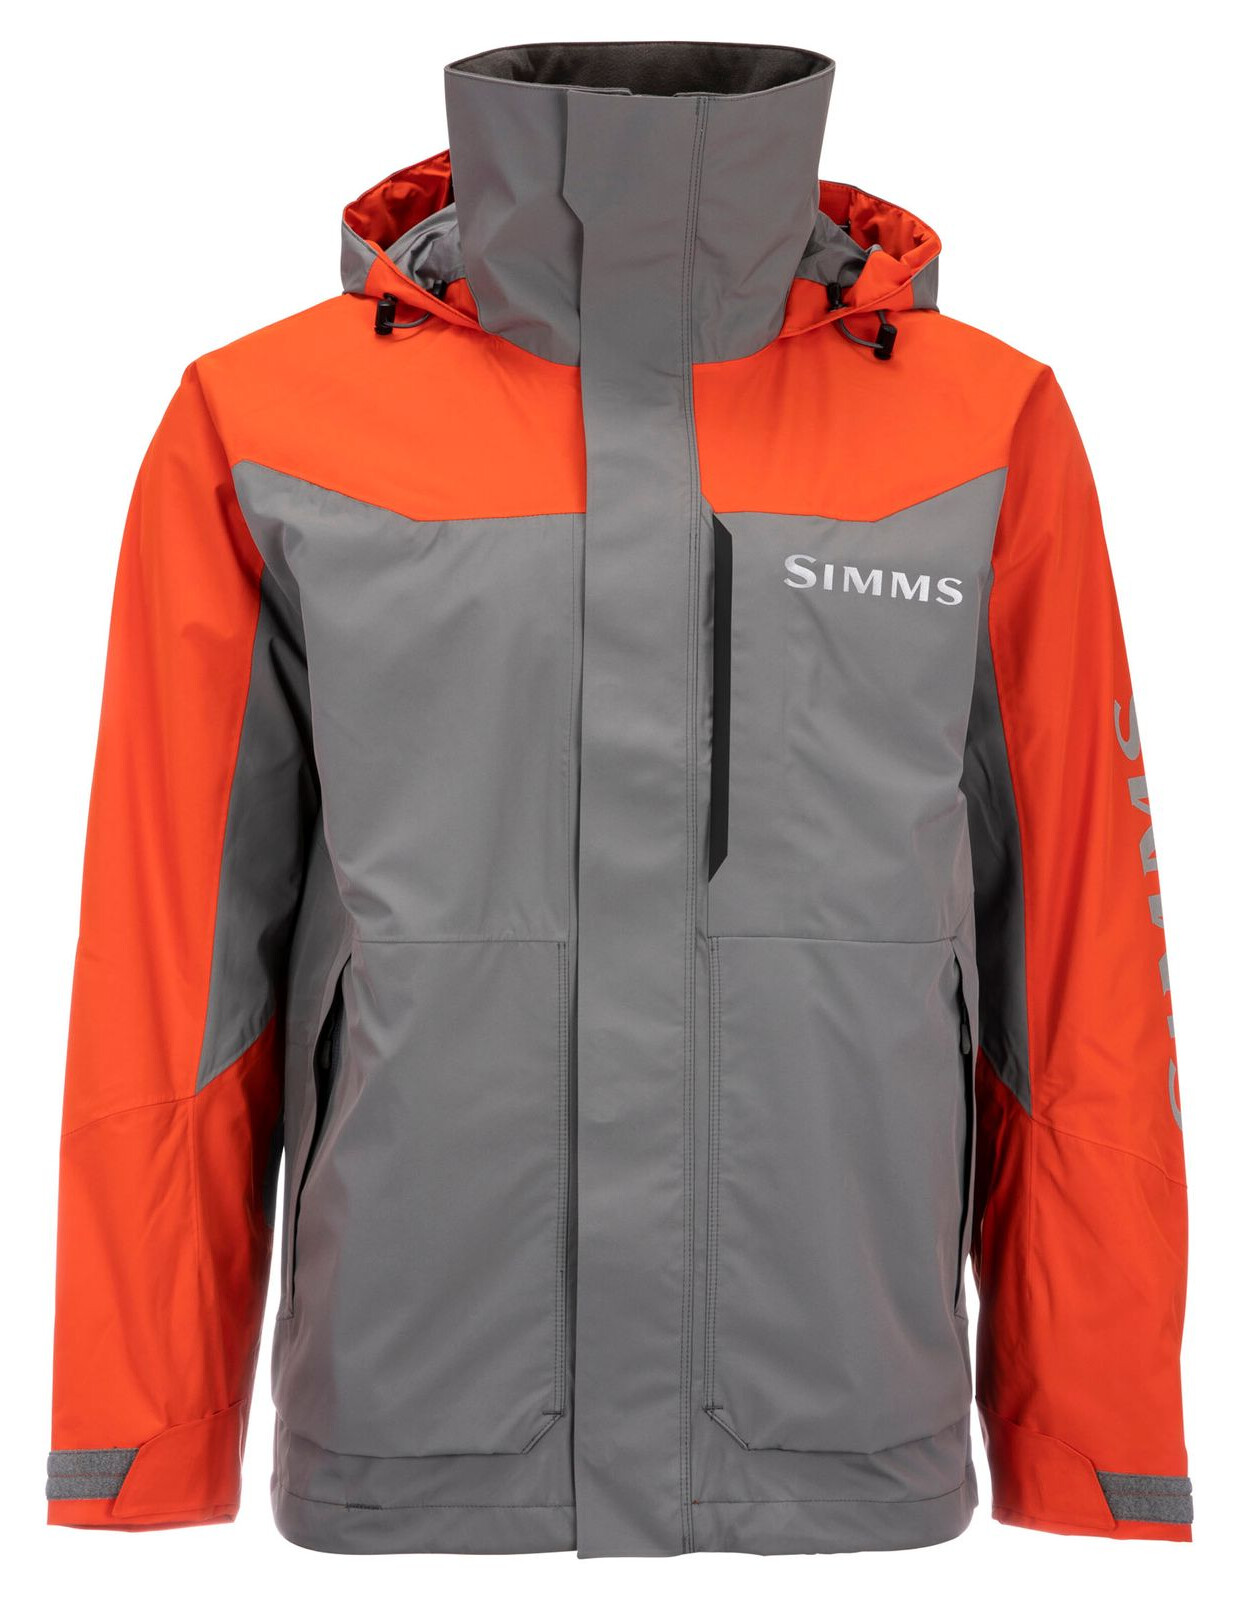 https://www.czechnymph.com/data/web/auto-imported-products/simms/simms-challenger-jacket-db023fd3.jpg